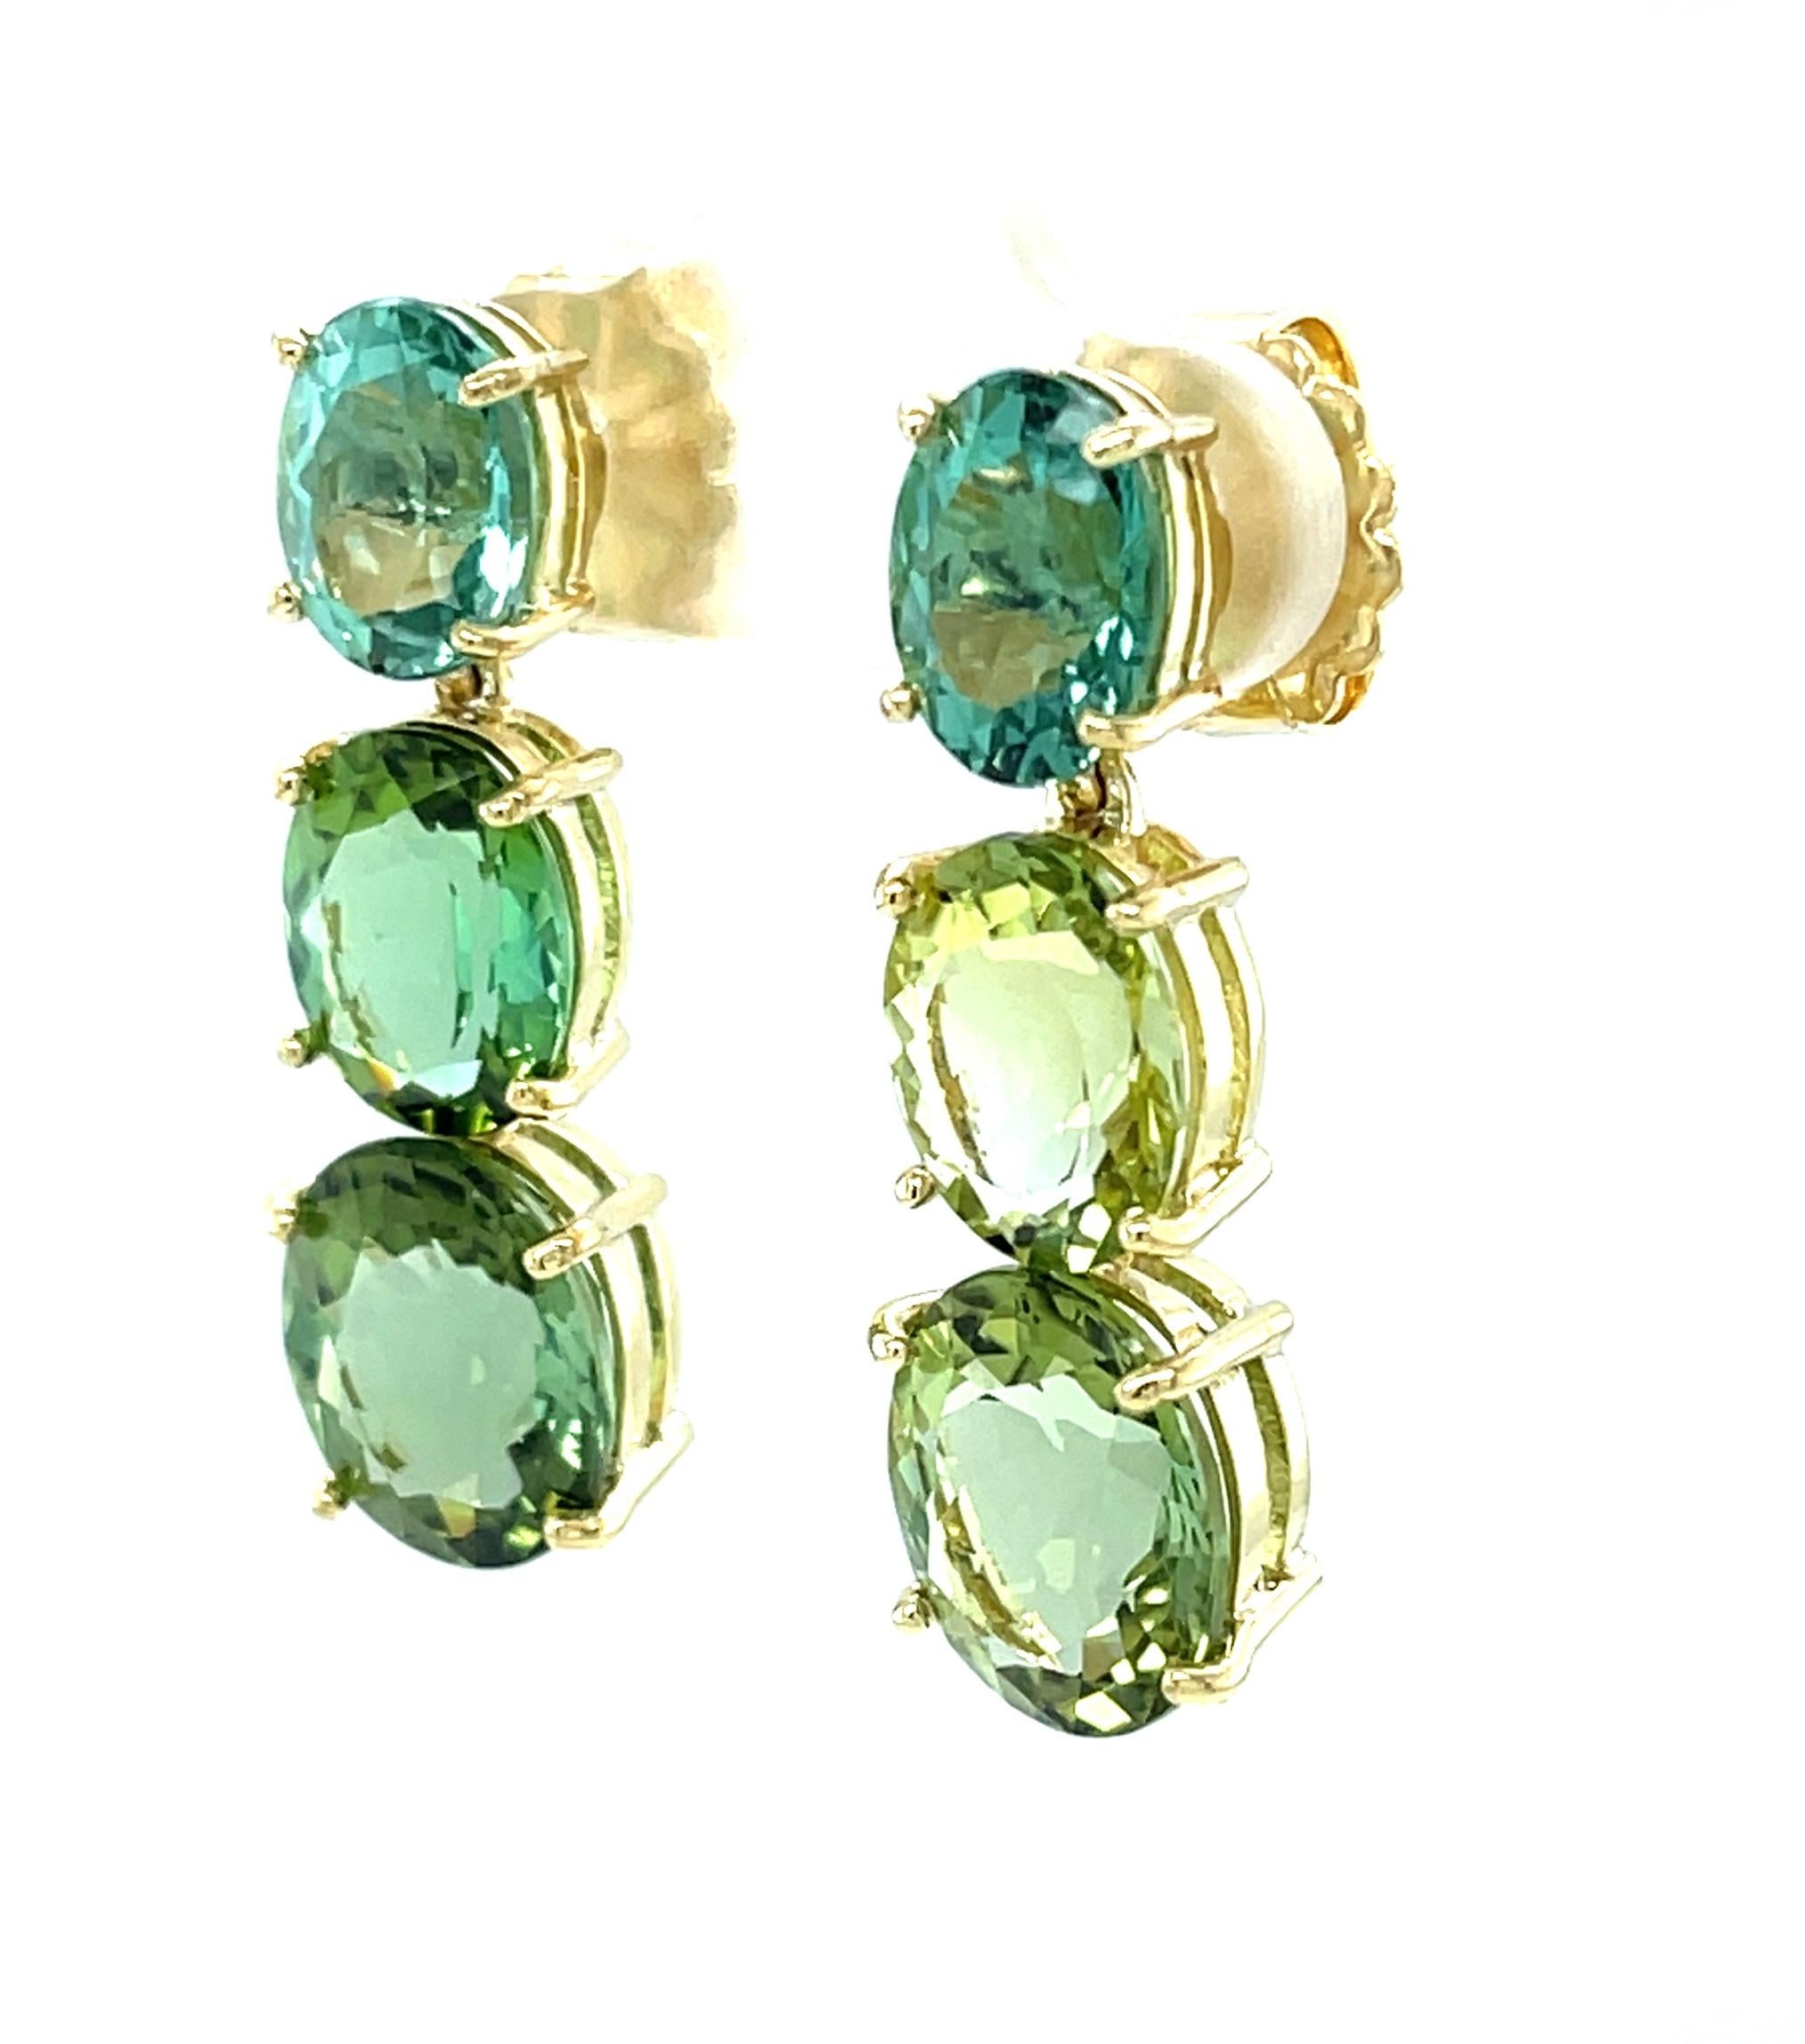 Green Multicolored Tourmaline and Yellow Gold Dangle Earrings, 19 Carats Total In New Condition For Sale In Los Angeles, CA